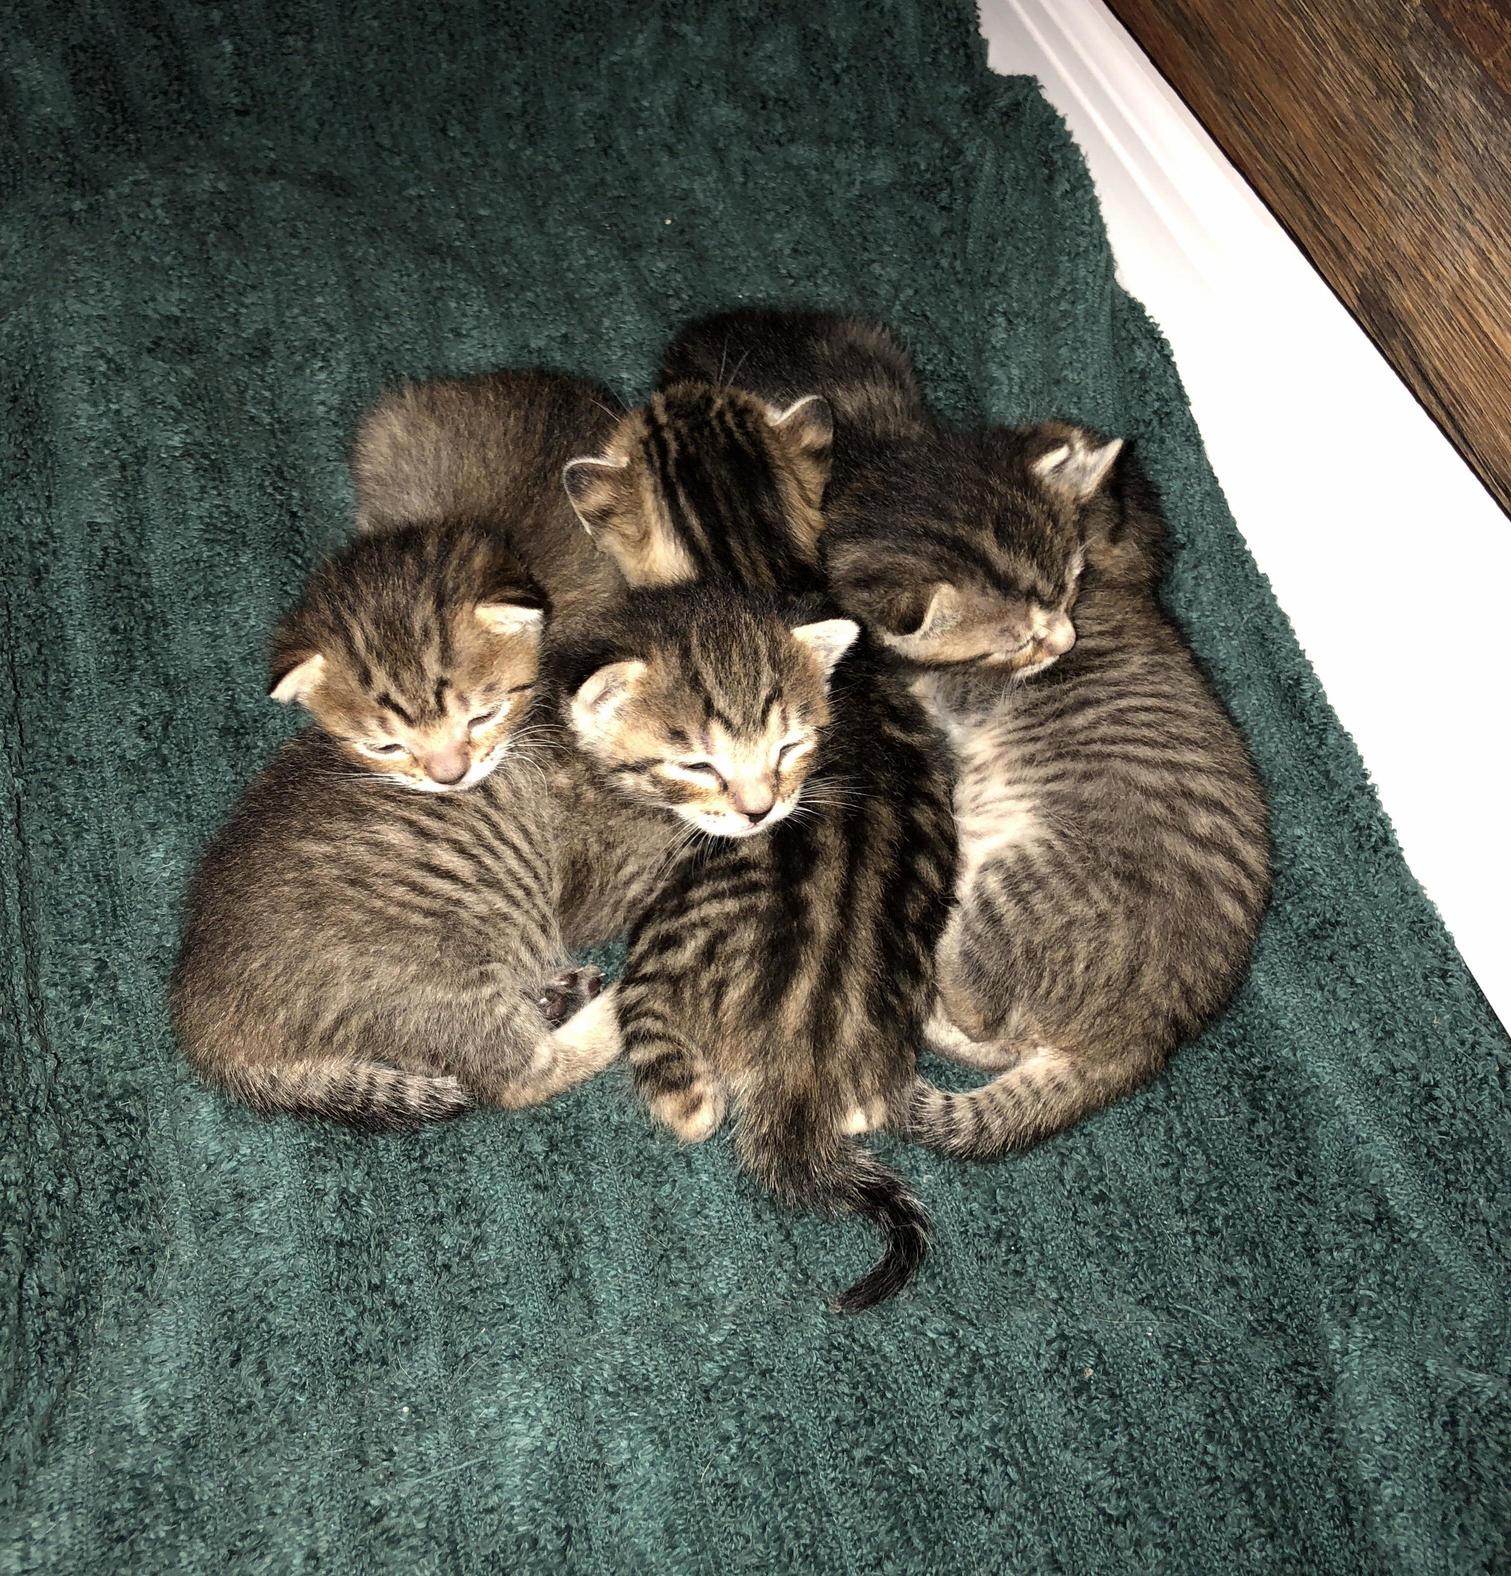 My cats adorable litter